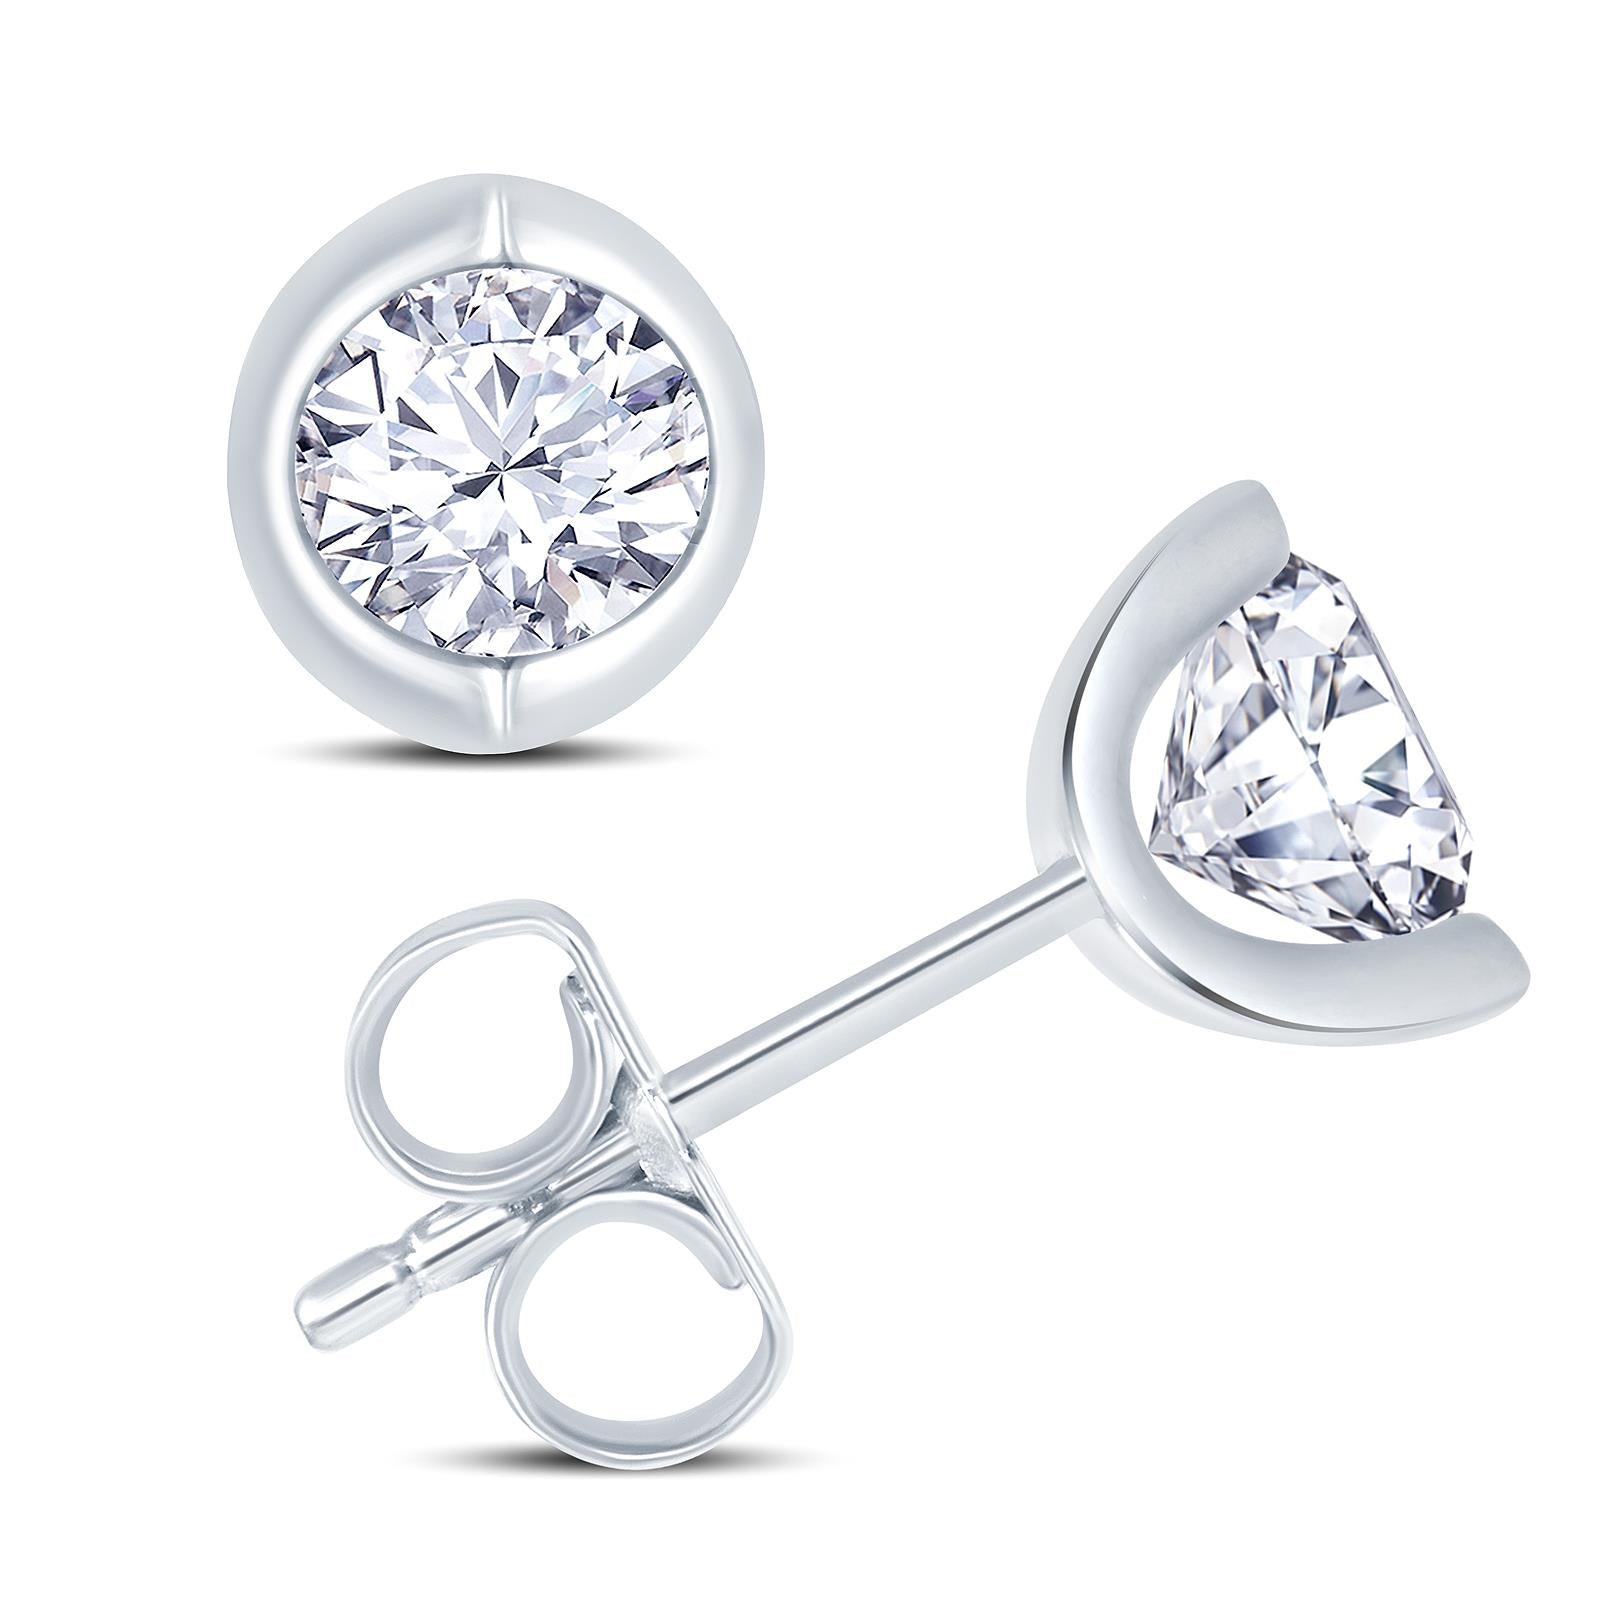 Round 2 Claw Diamond Stud Earrings, 040ct - 18ct White Gold - EC040S7W ...